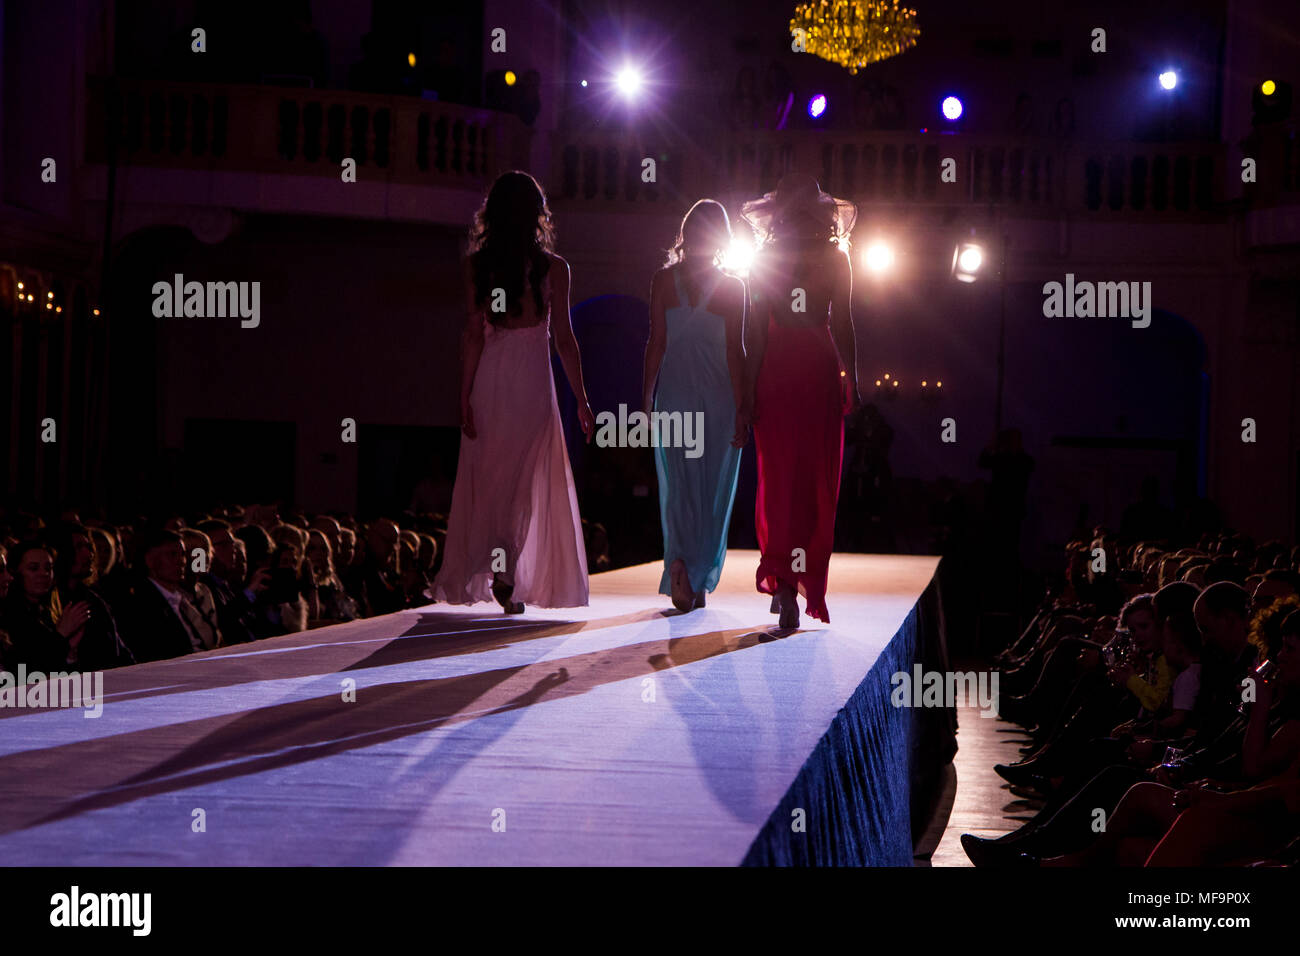 A picture from a fashion show. The models are walking on a catwalk and showing the new clothing. Stock Photo